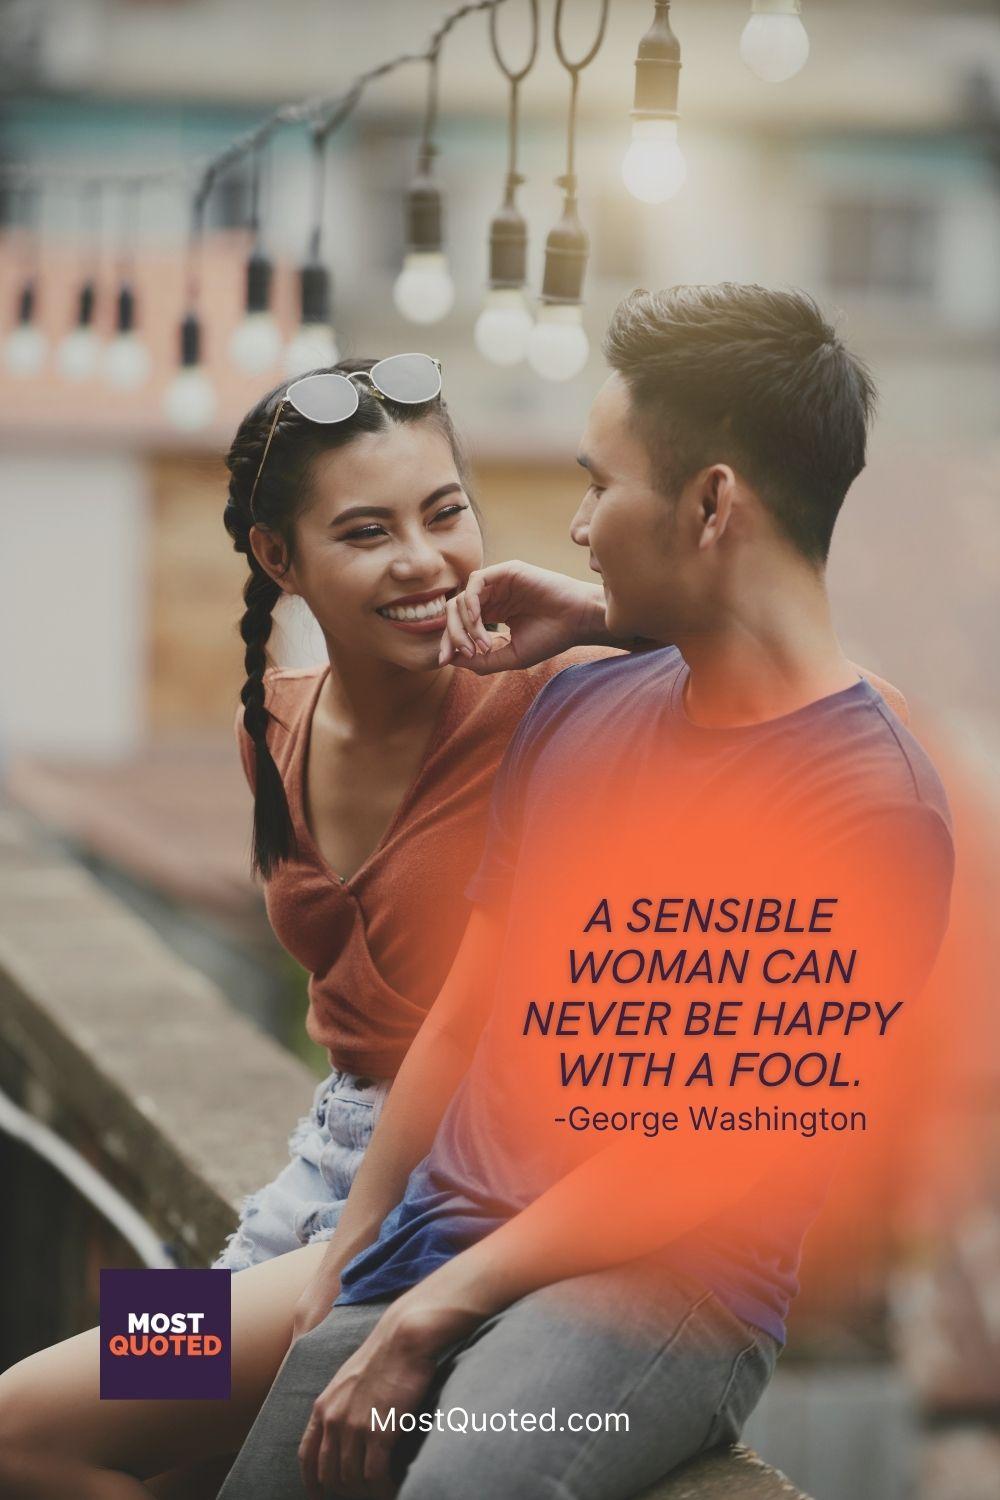 A sensible woman can never be happy with a fool. - George Washington